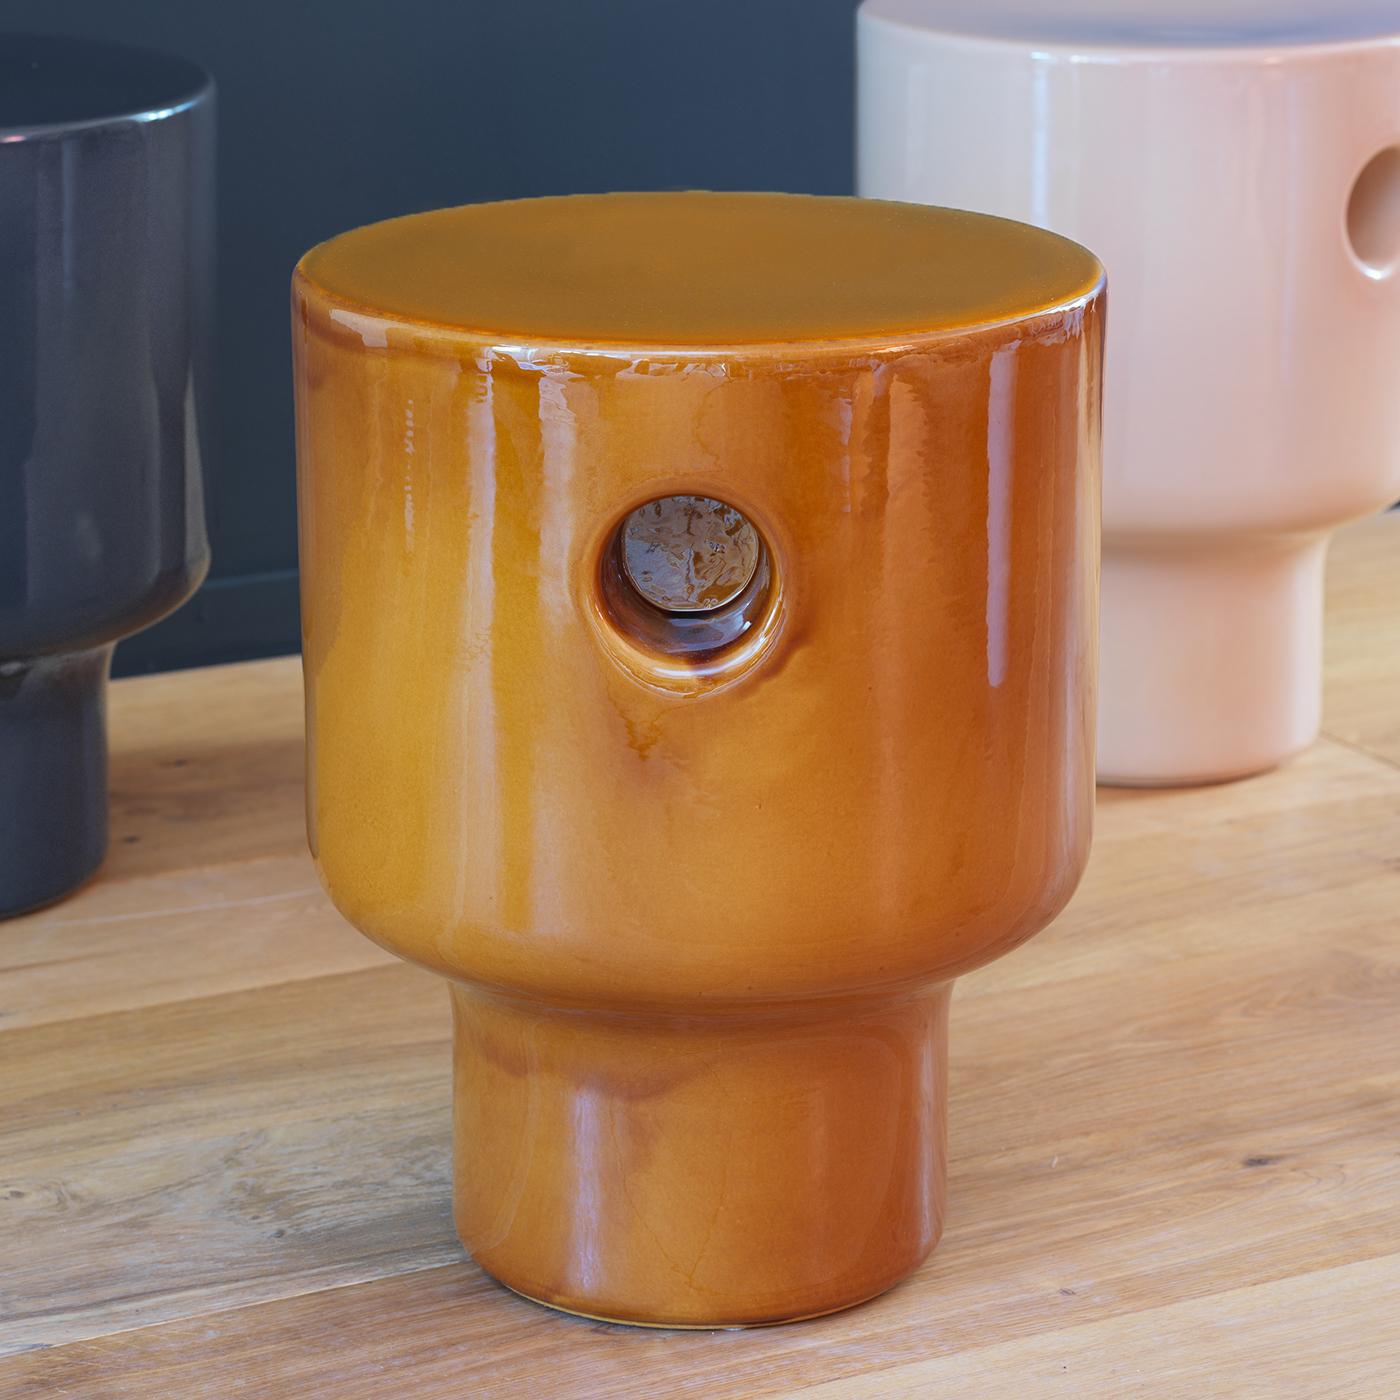 Stool Lofi Orange all in hand-crafted ceramic 
in glazed orange finish. 
Also available in other colors, on request and 
providing RAL reference.